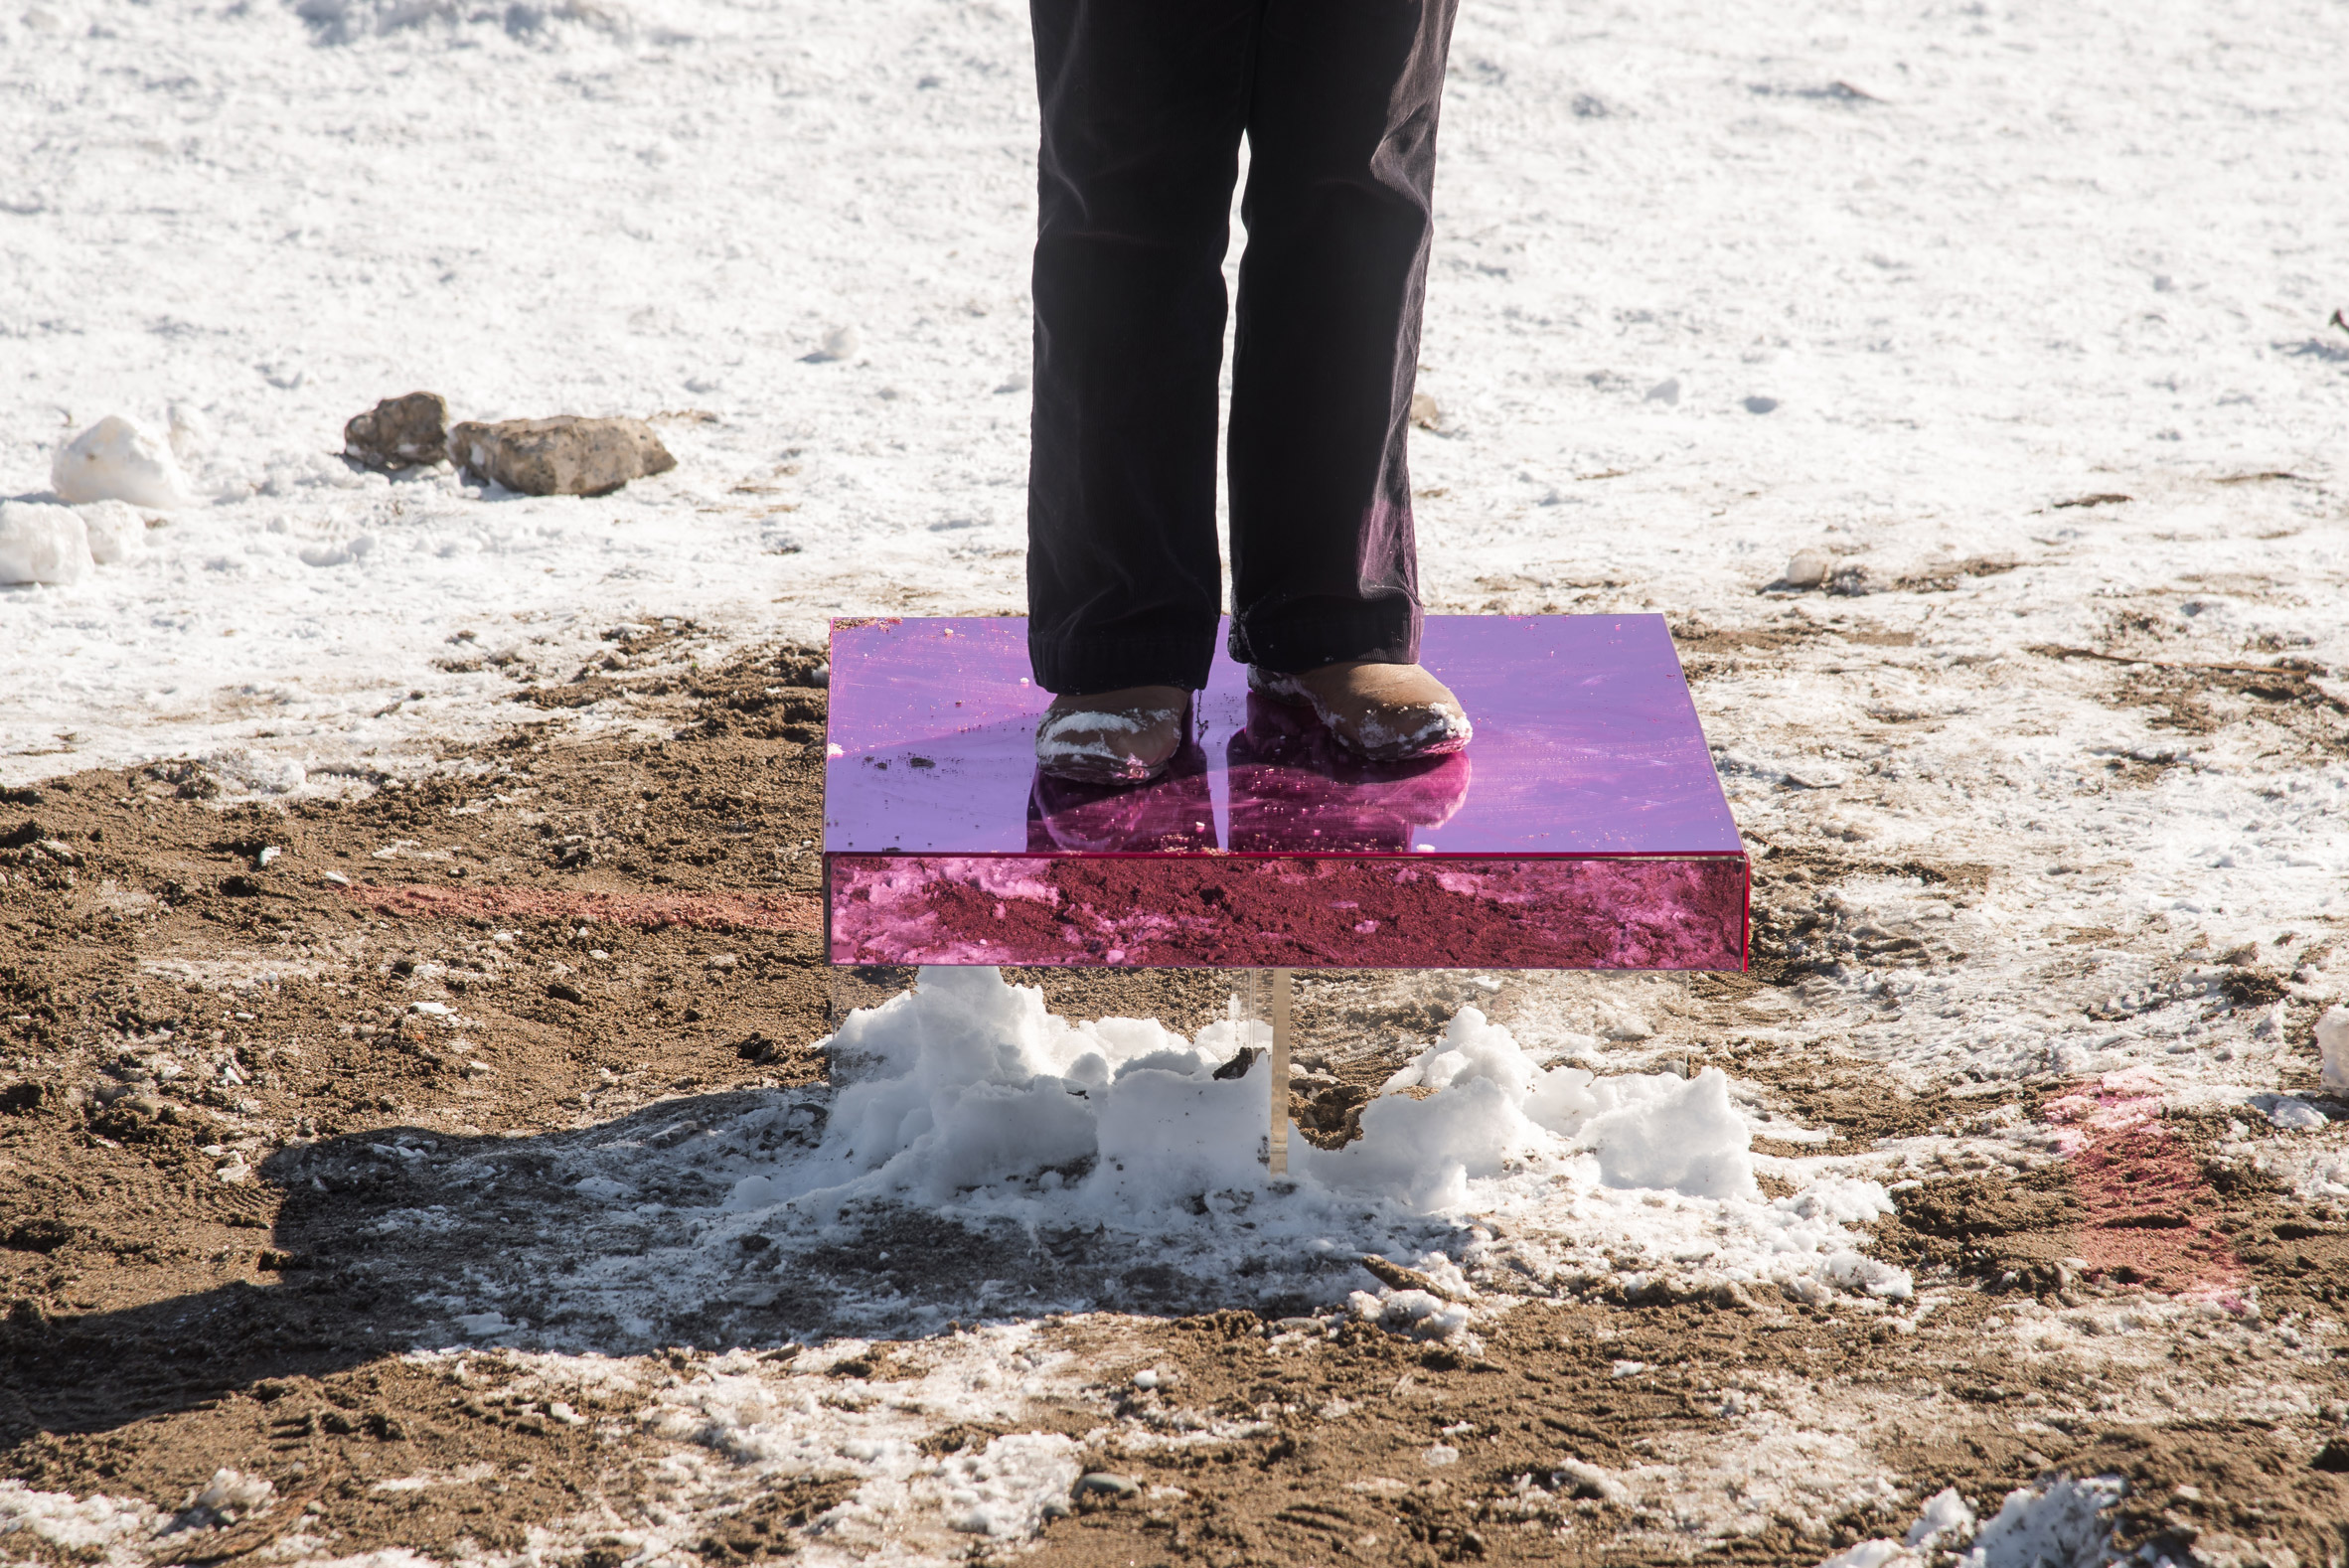 Ground² installation by Humber College students for Winter Stations Toronto 2019